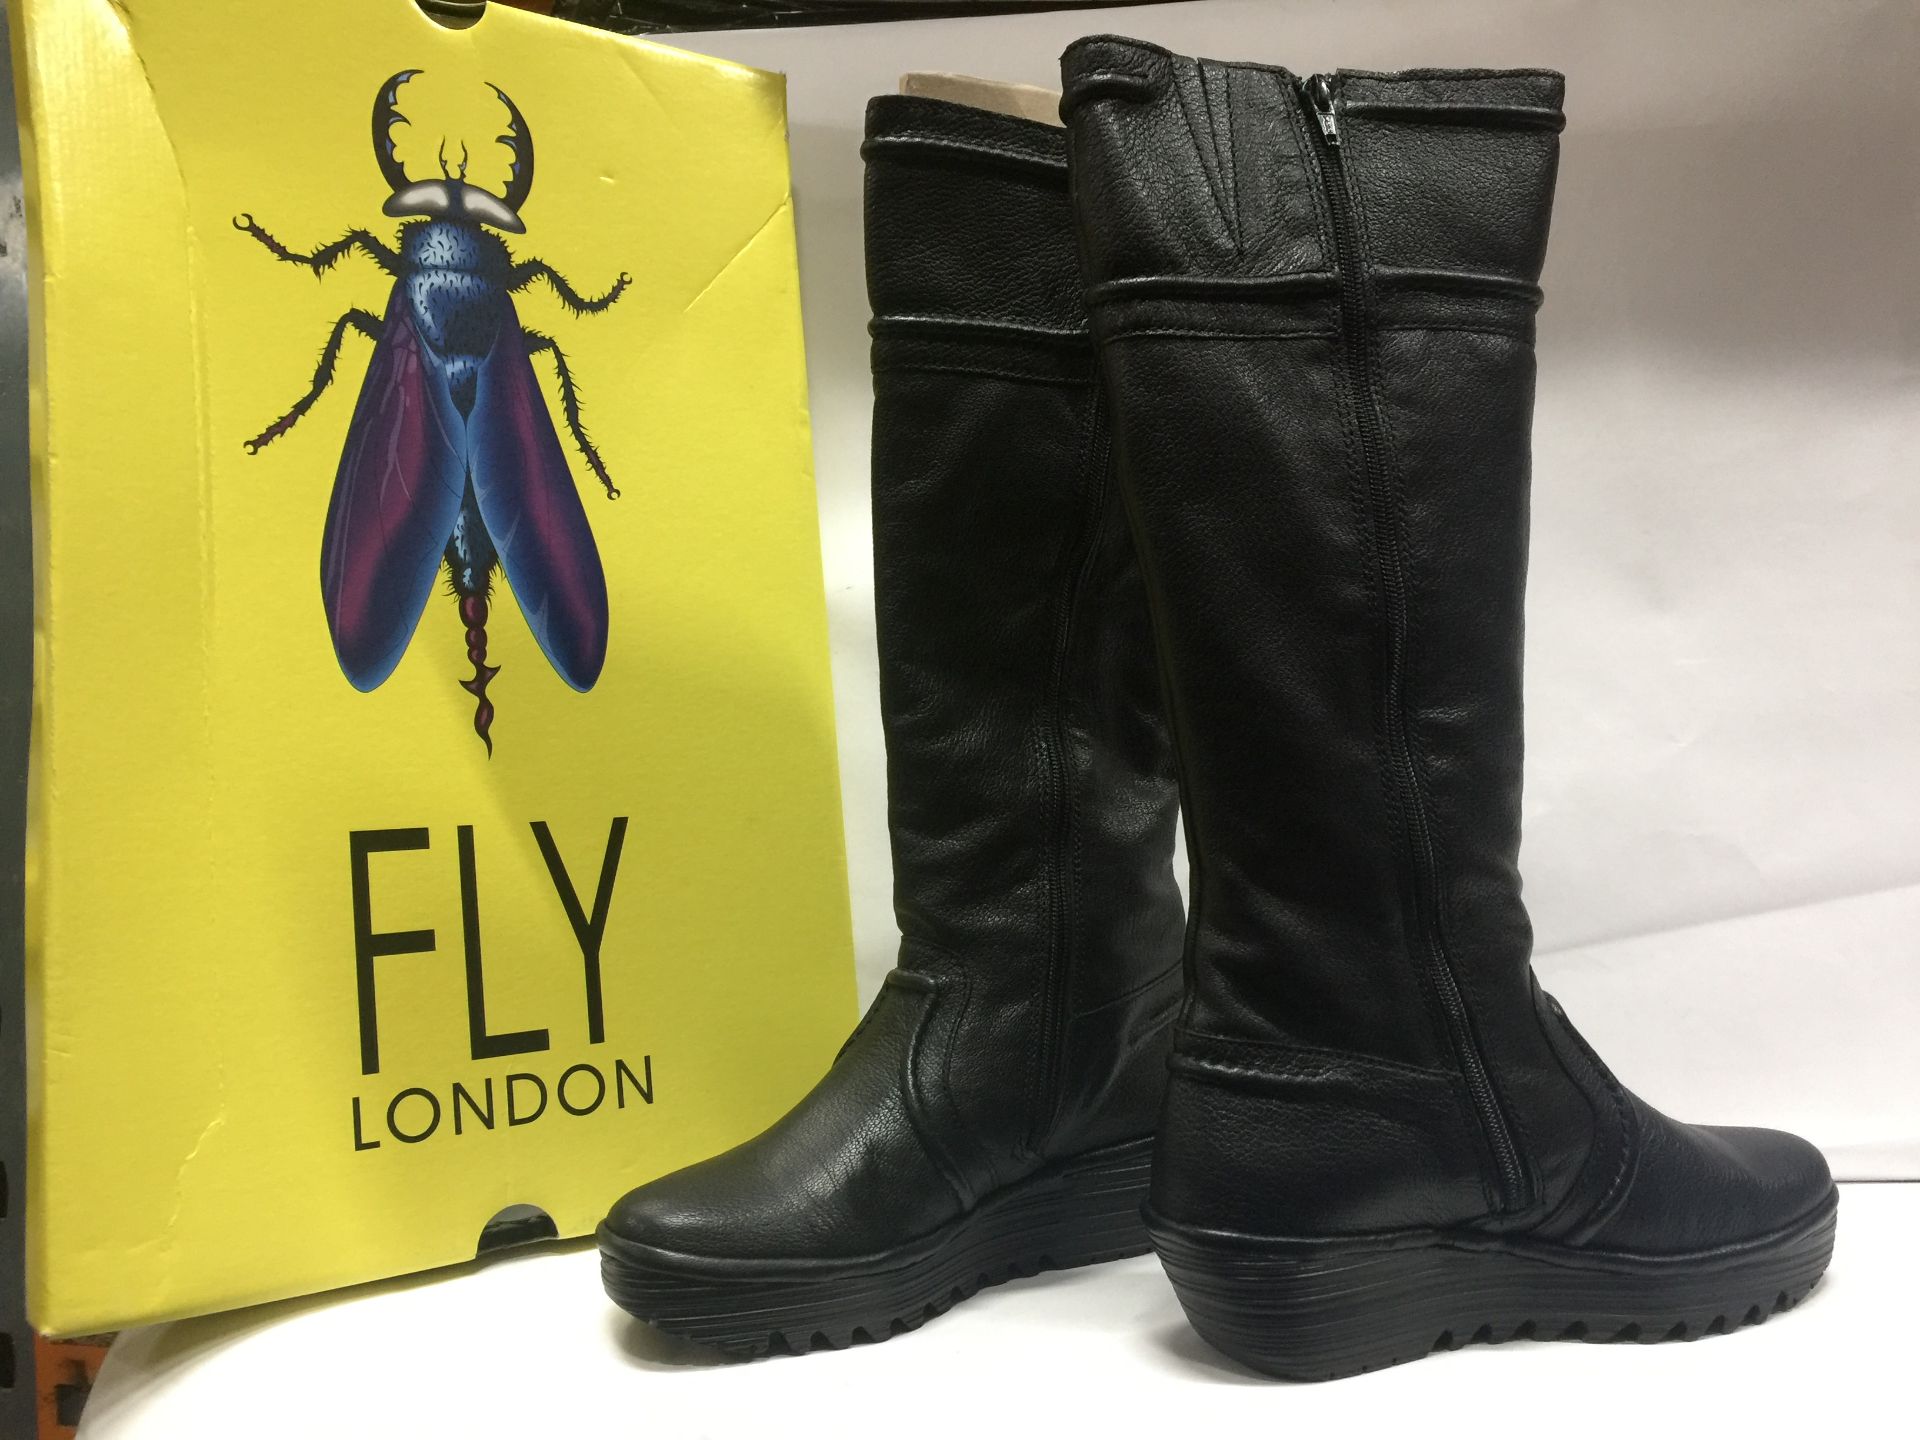 5 x Fly London Women's Boots Mixed Sizes, Styles and Colours Size Ranging EU 39 - EU 42 - Customer R